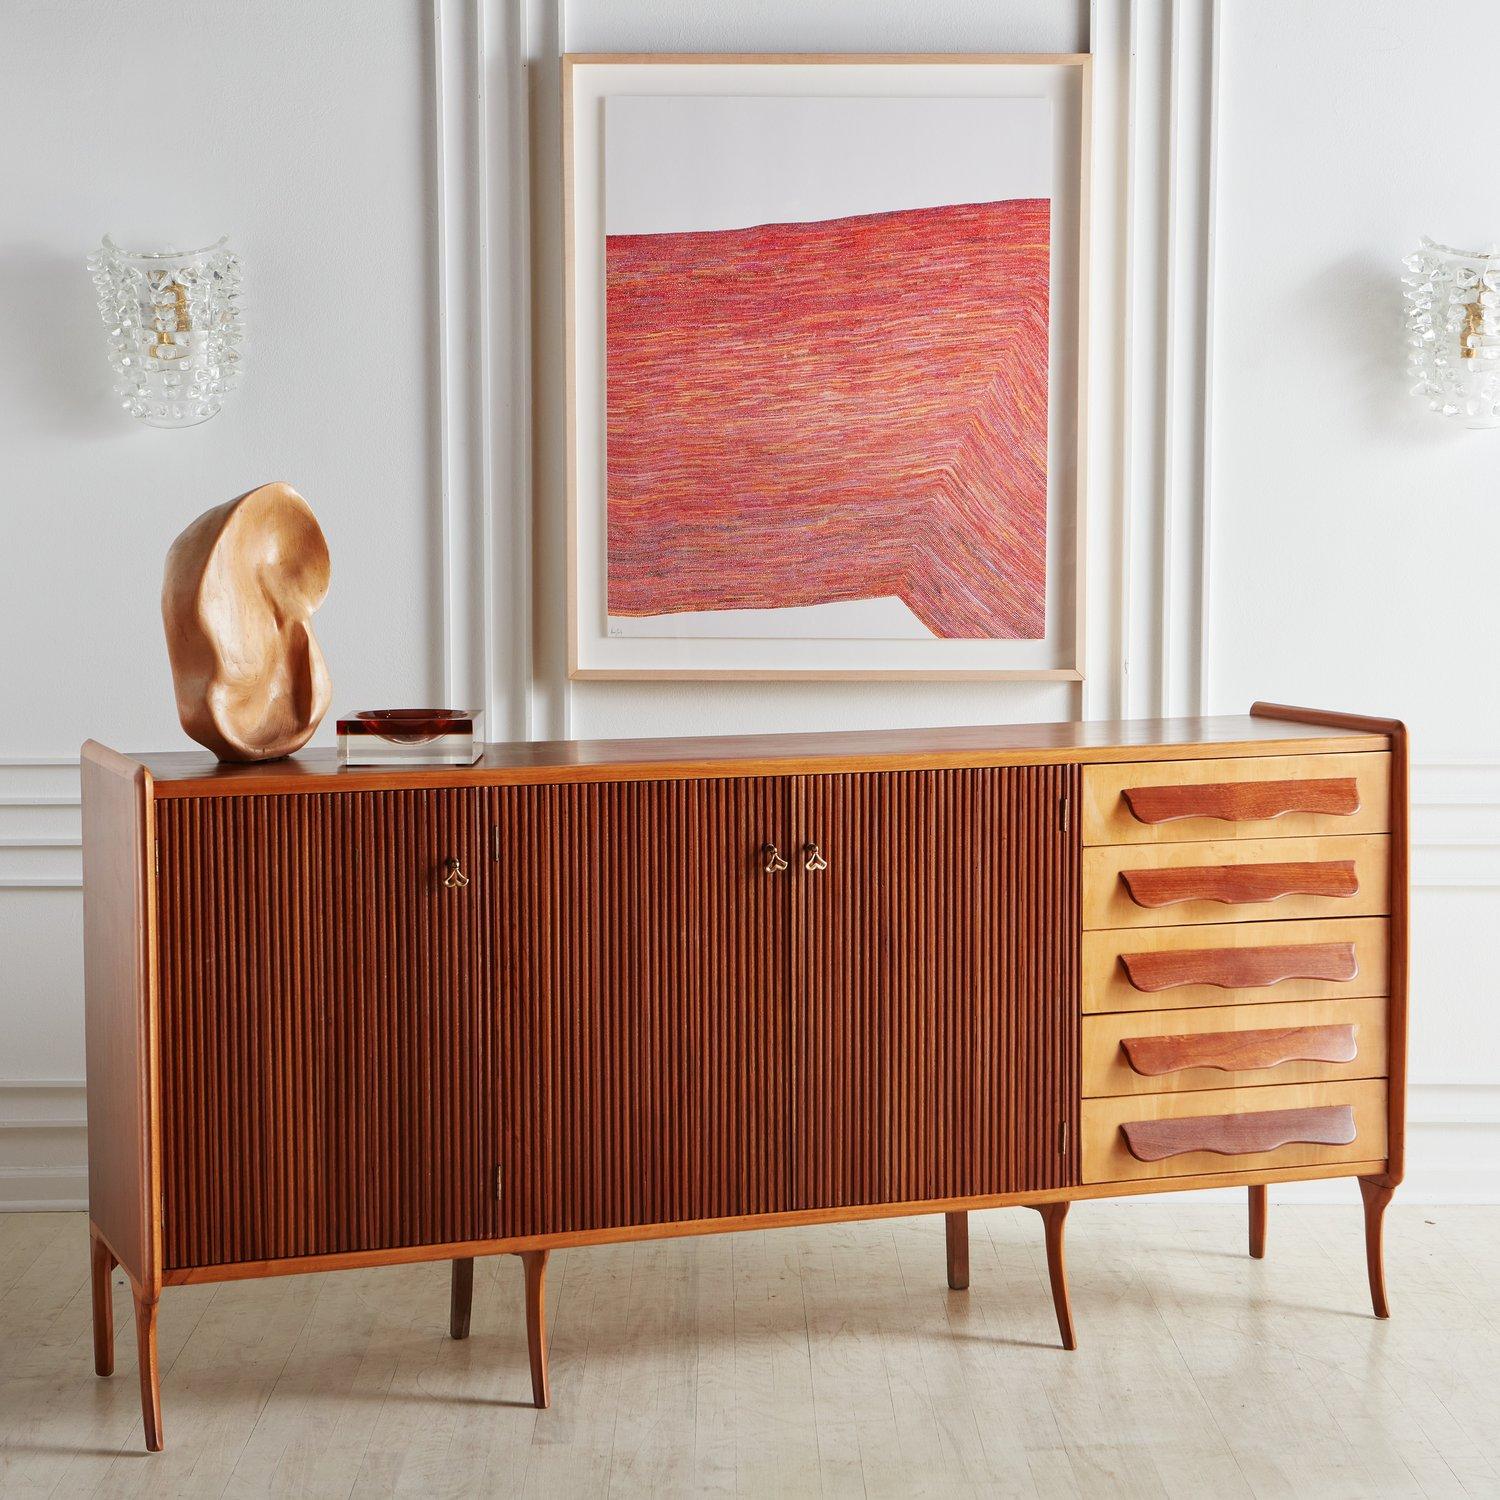 An extraordinary 1970s teak sideboard in the style of Paolo Buffa. This piece has three doors with fluted details and brass pulls, which open outwards to reveal two shelves. It has five birch drawers on the right hand side with curved teak handles.